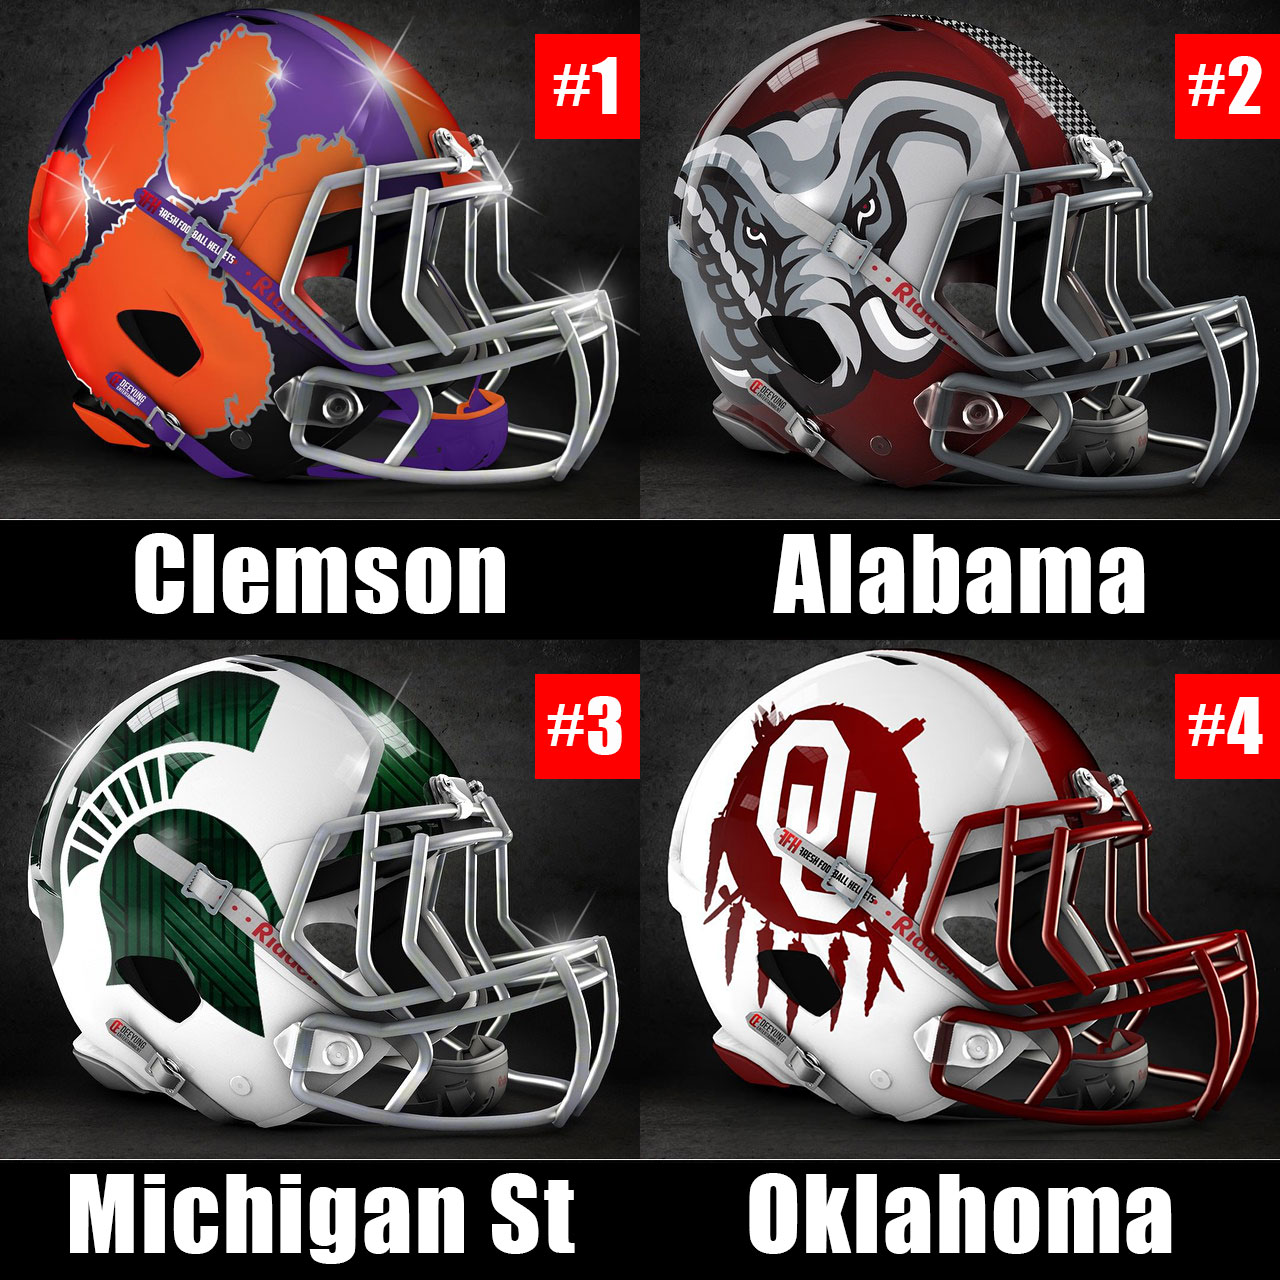 2015 College Football Playoff will include Clemson, Alabama, Michigan State and Oklahoma